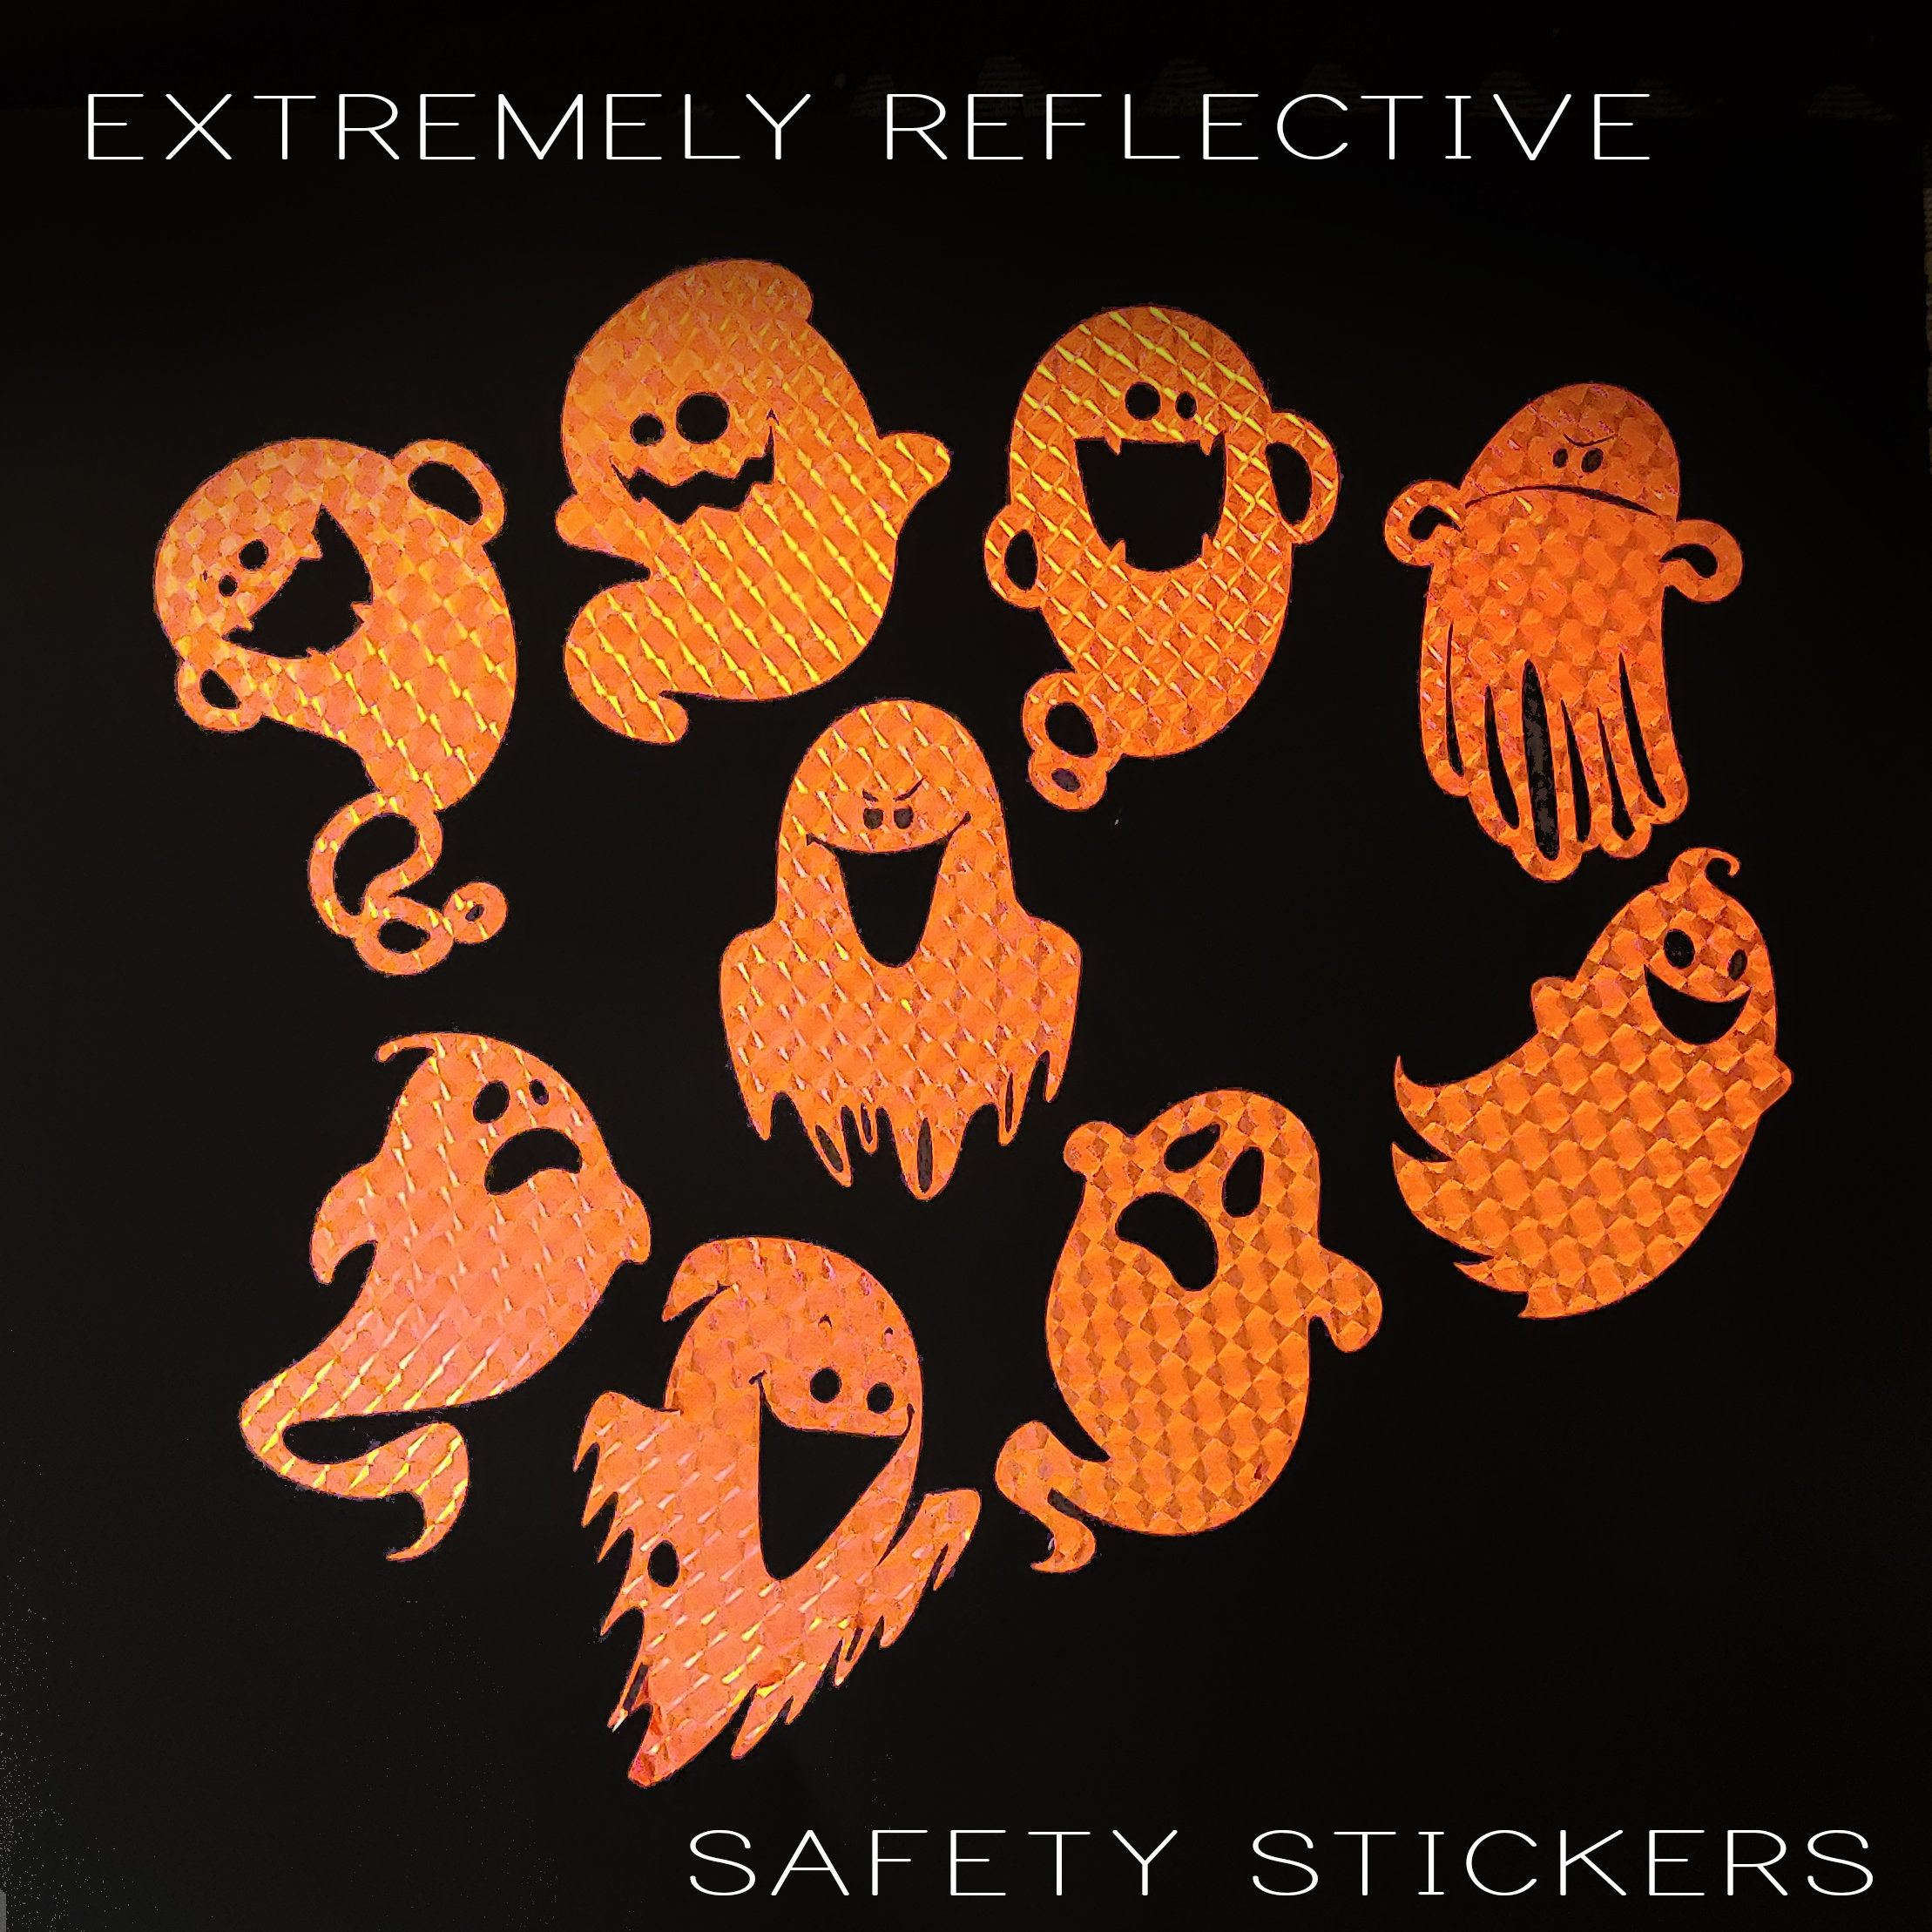 Reflective Stickers Decal Set, Safety Stickers, Reflective Decals for  Bicycles, Helmets, Vehicles, Strollers, Wheelchairs, Scooters 